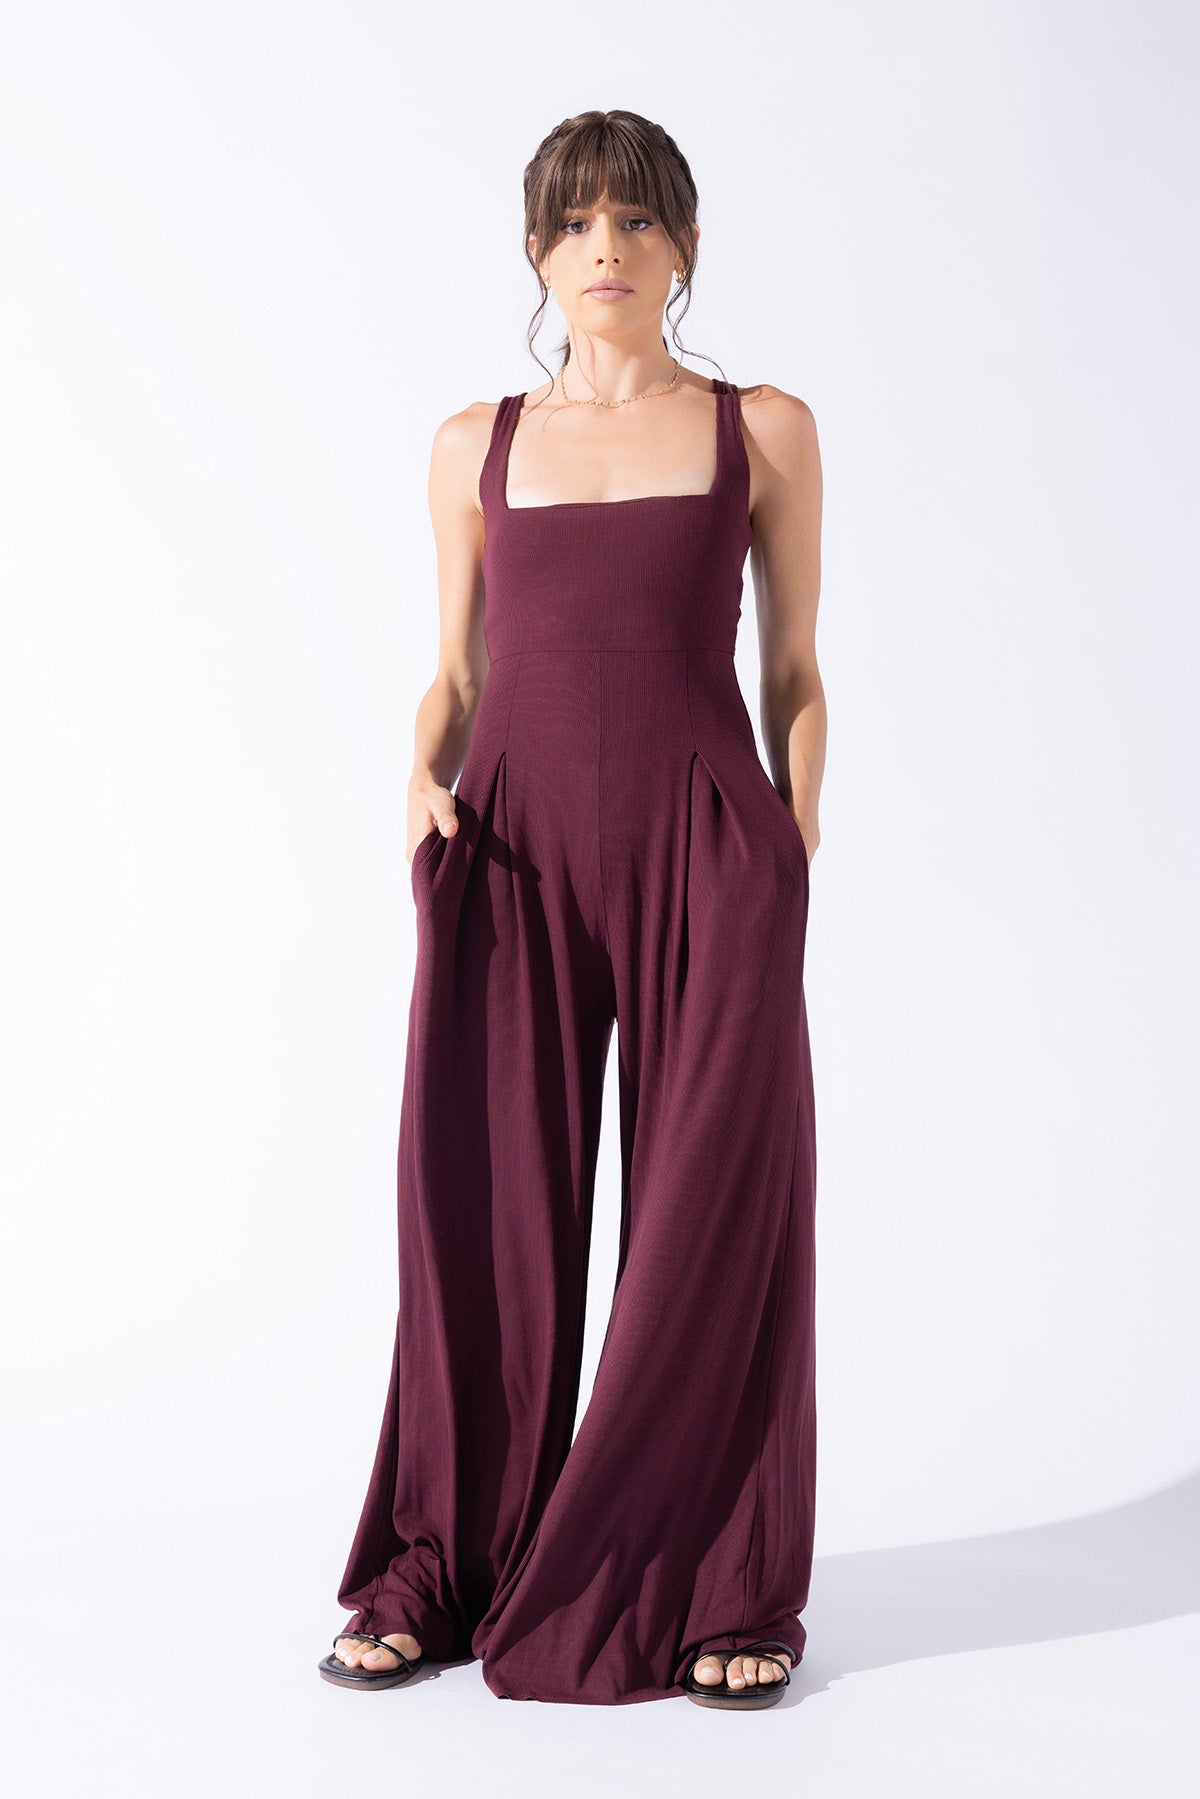 Go with the Flow Jumpsuit - Vineyard Wine